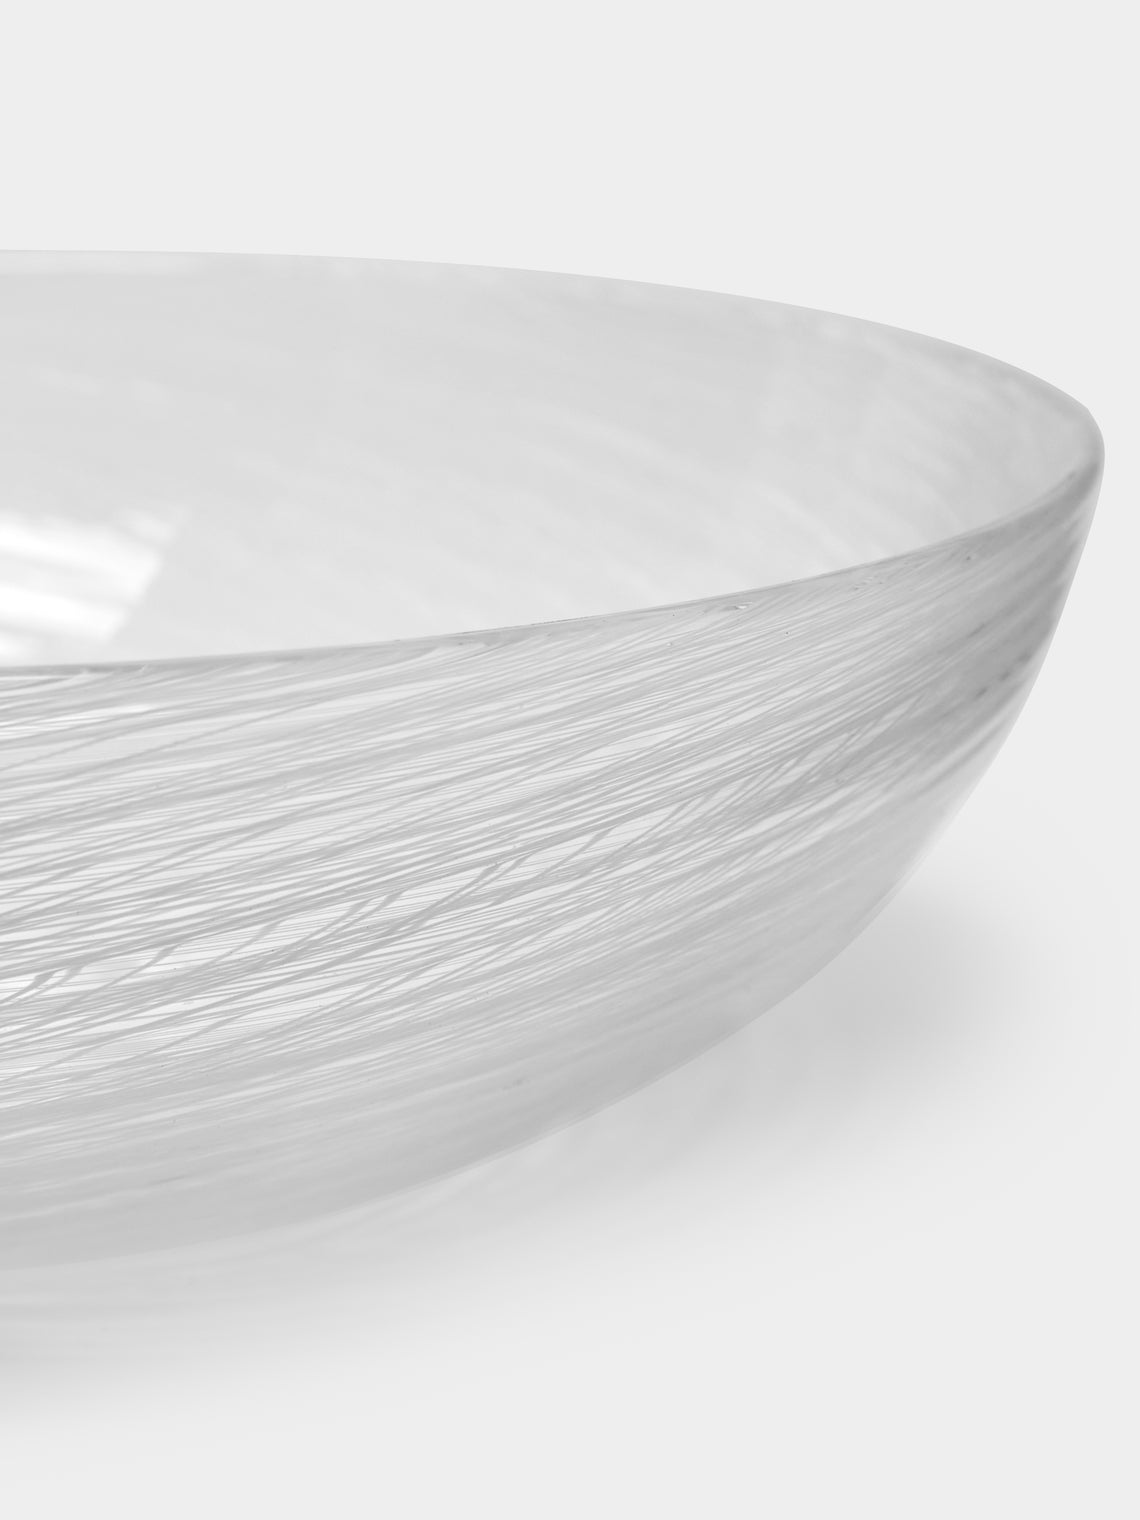 Antique and Vintage - Mid-Century Venini Murano Glass Bowl -  - ABASK